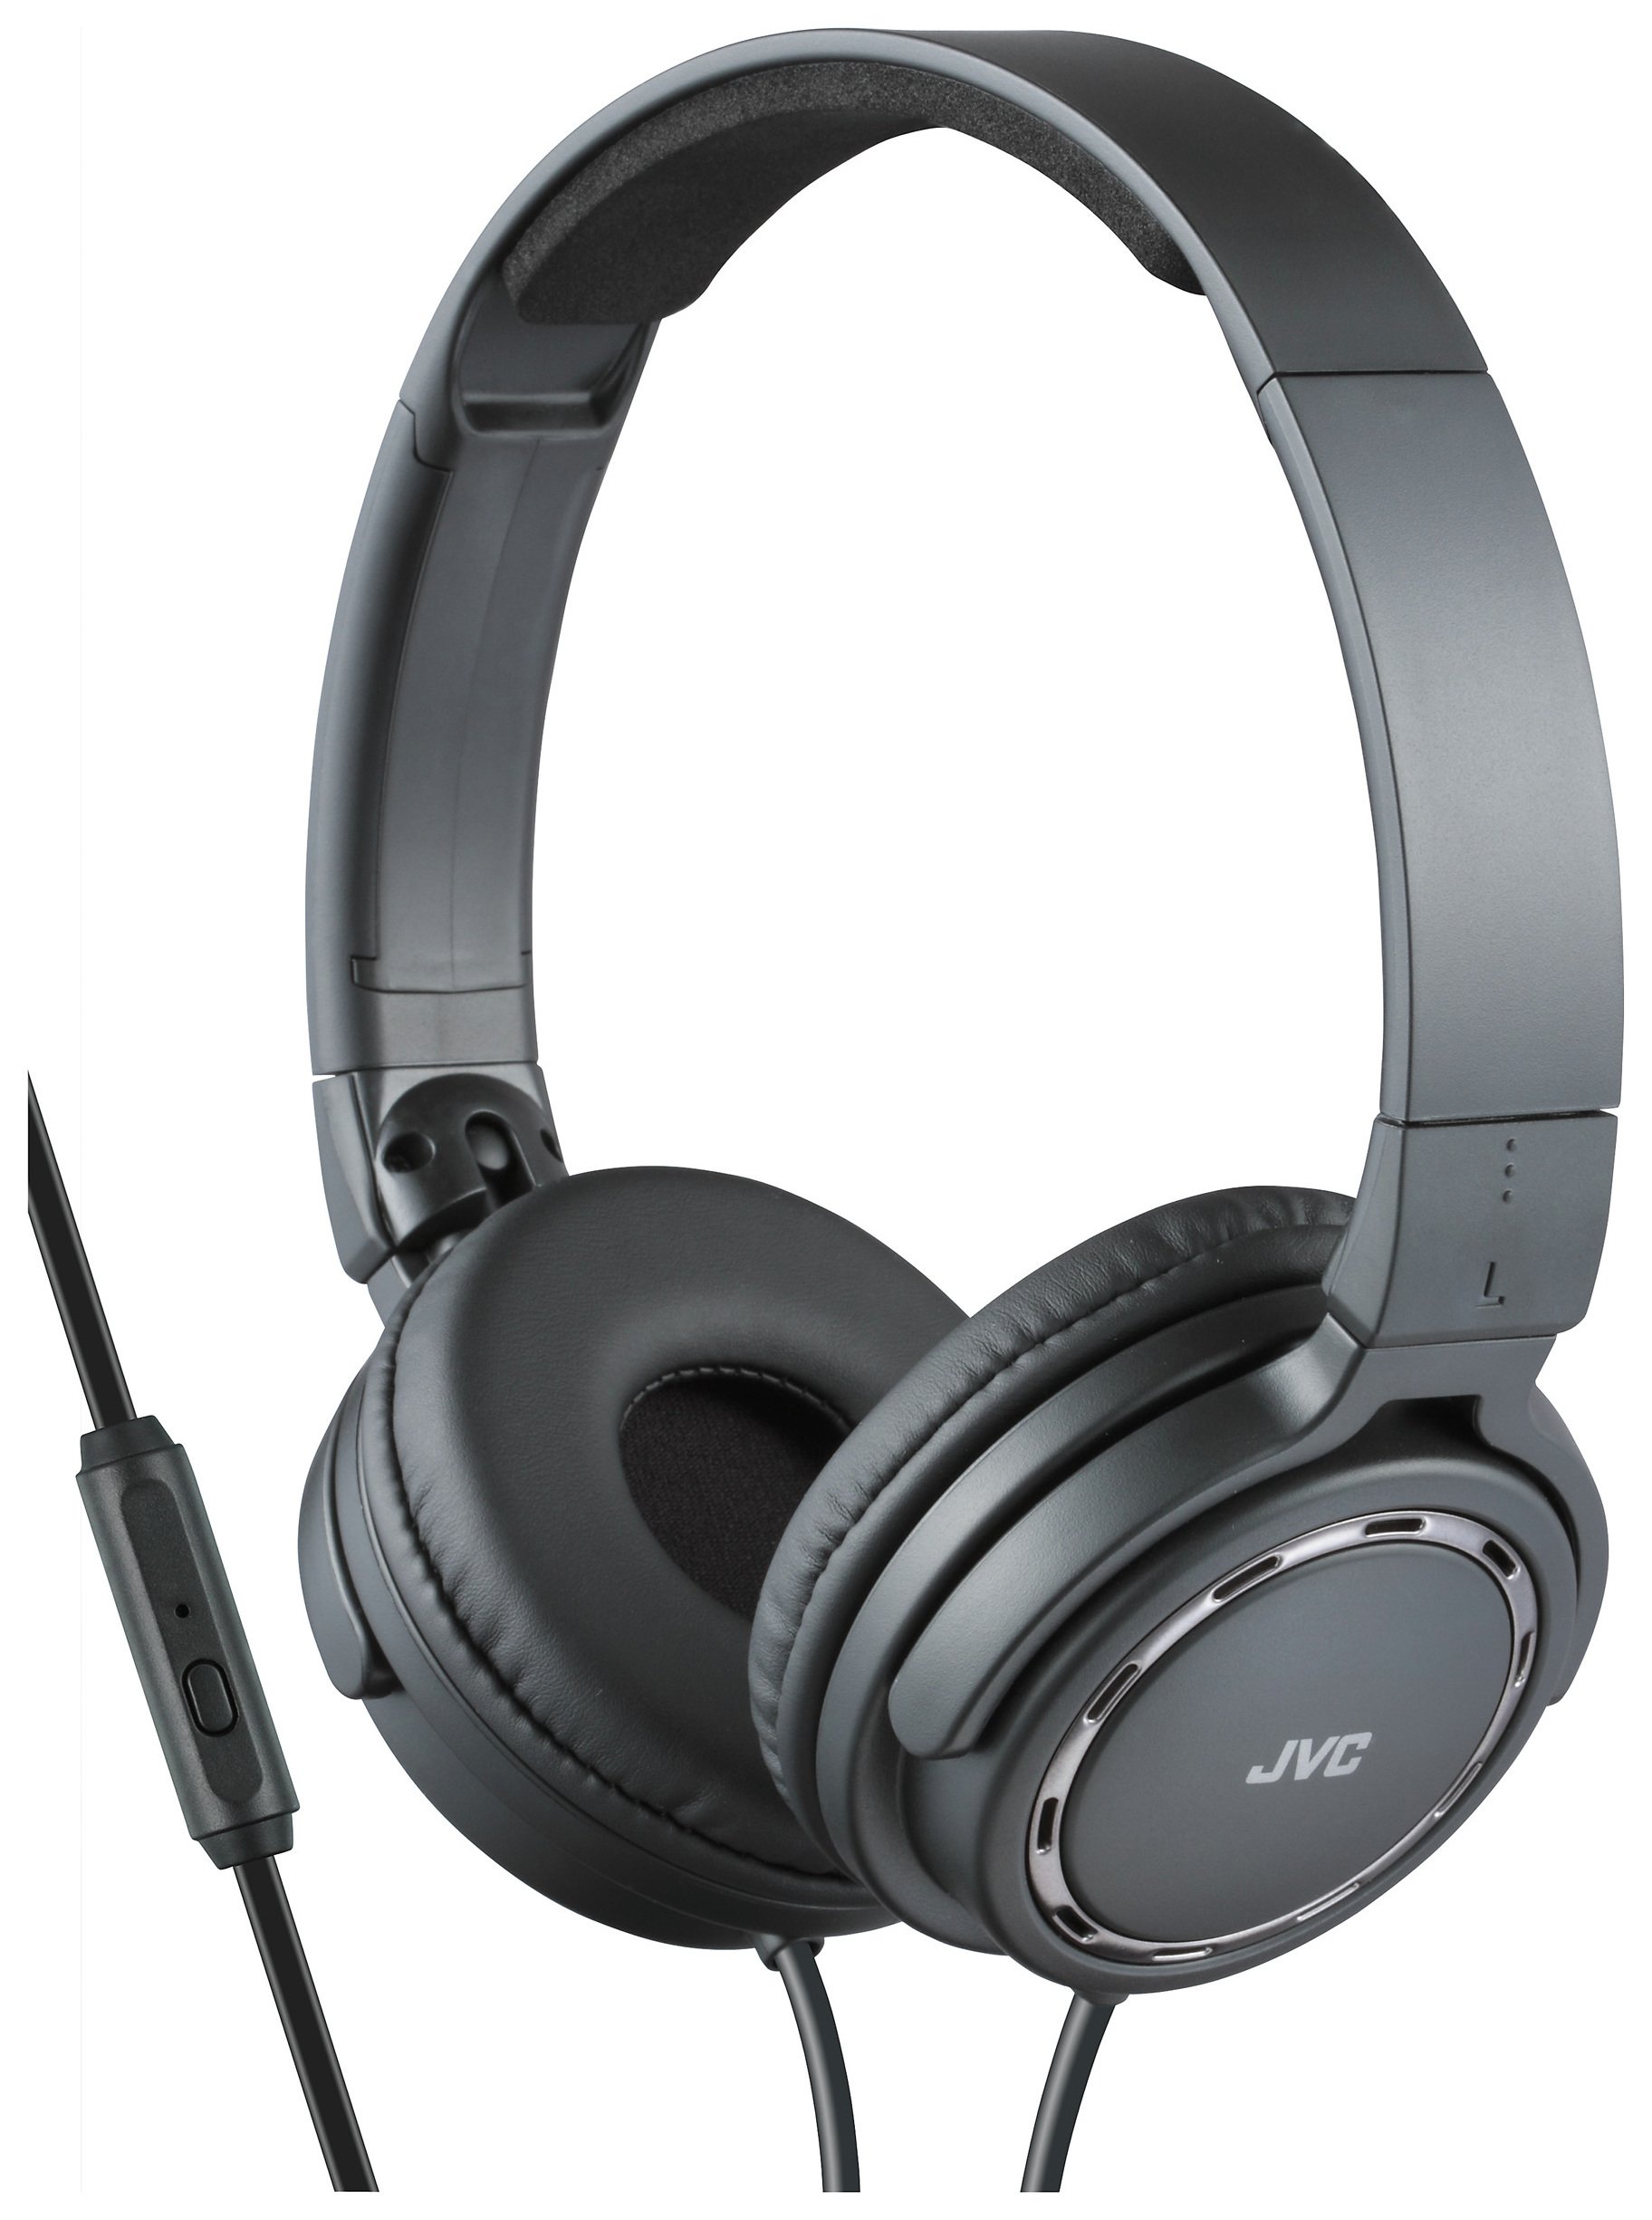 JVC - HA-SR525 On-Ear Headphones with Mic and Remote Review